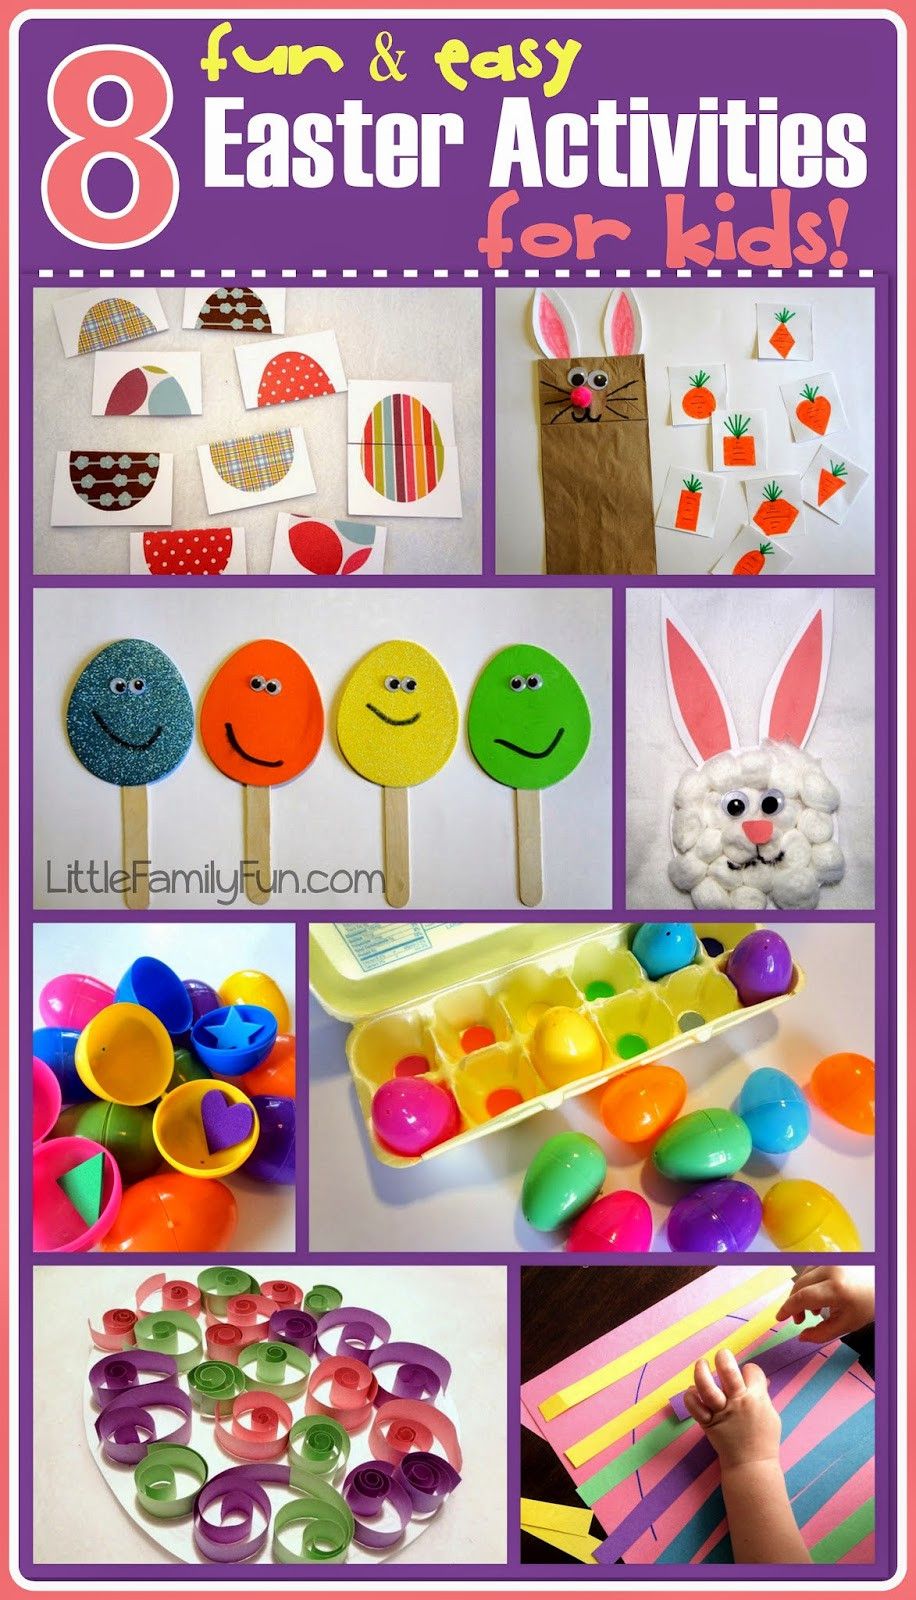 Easter Activities For Families
 Little Family Fun 8 fun & easy Easter Activities for Kids